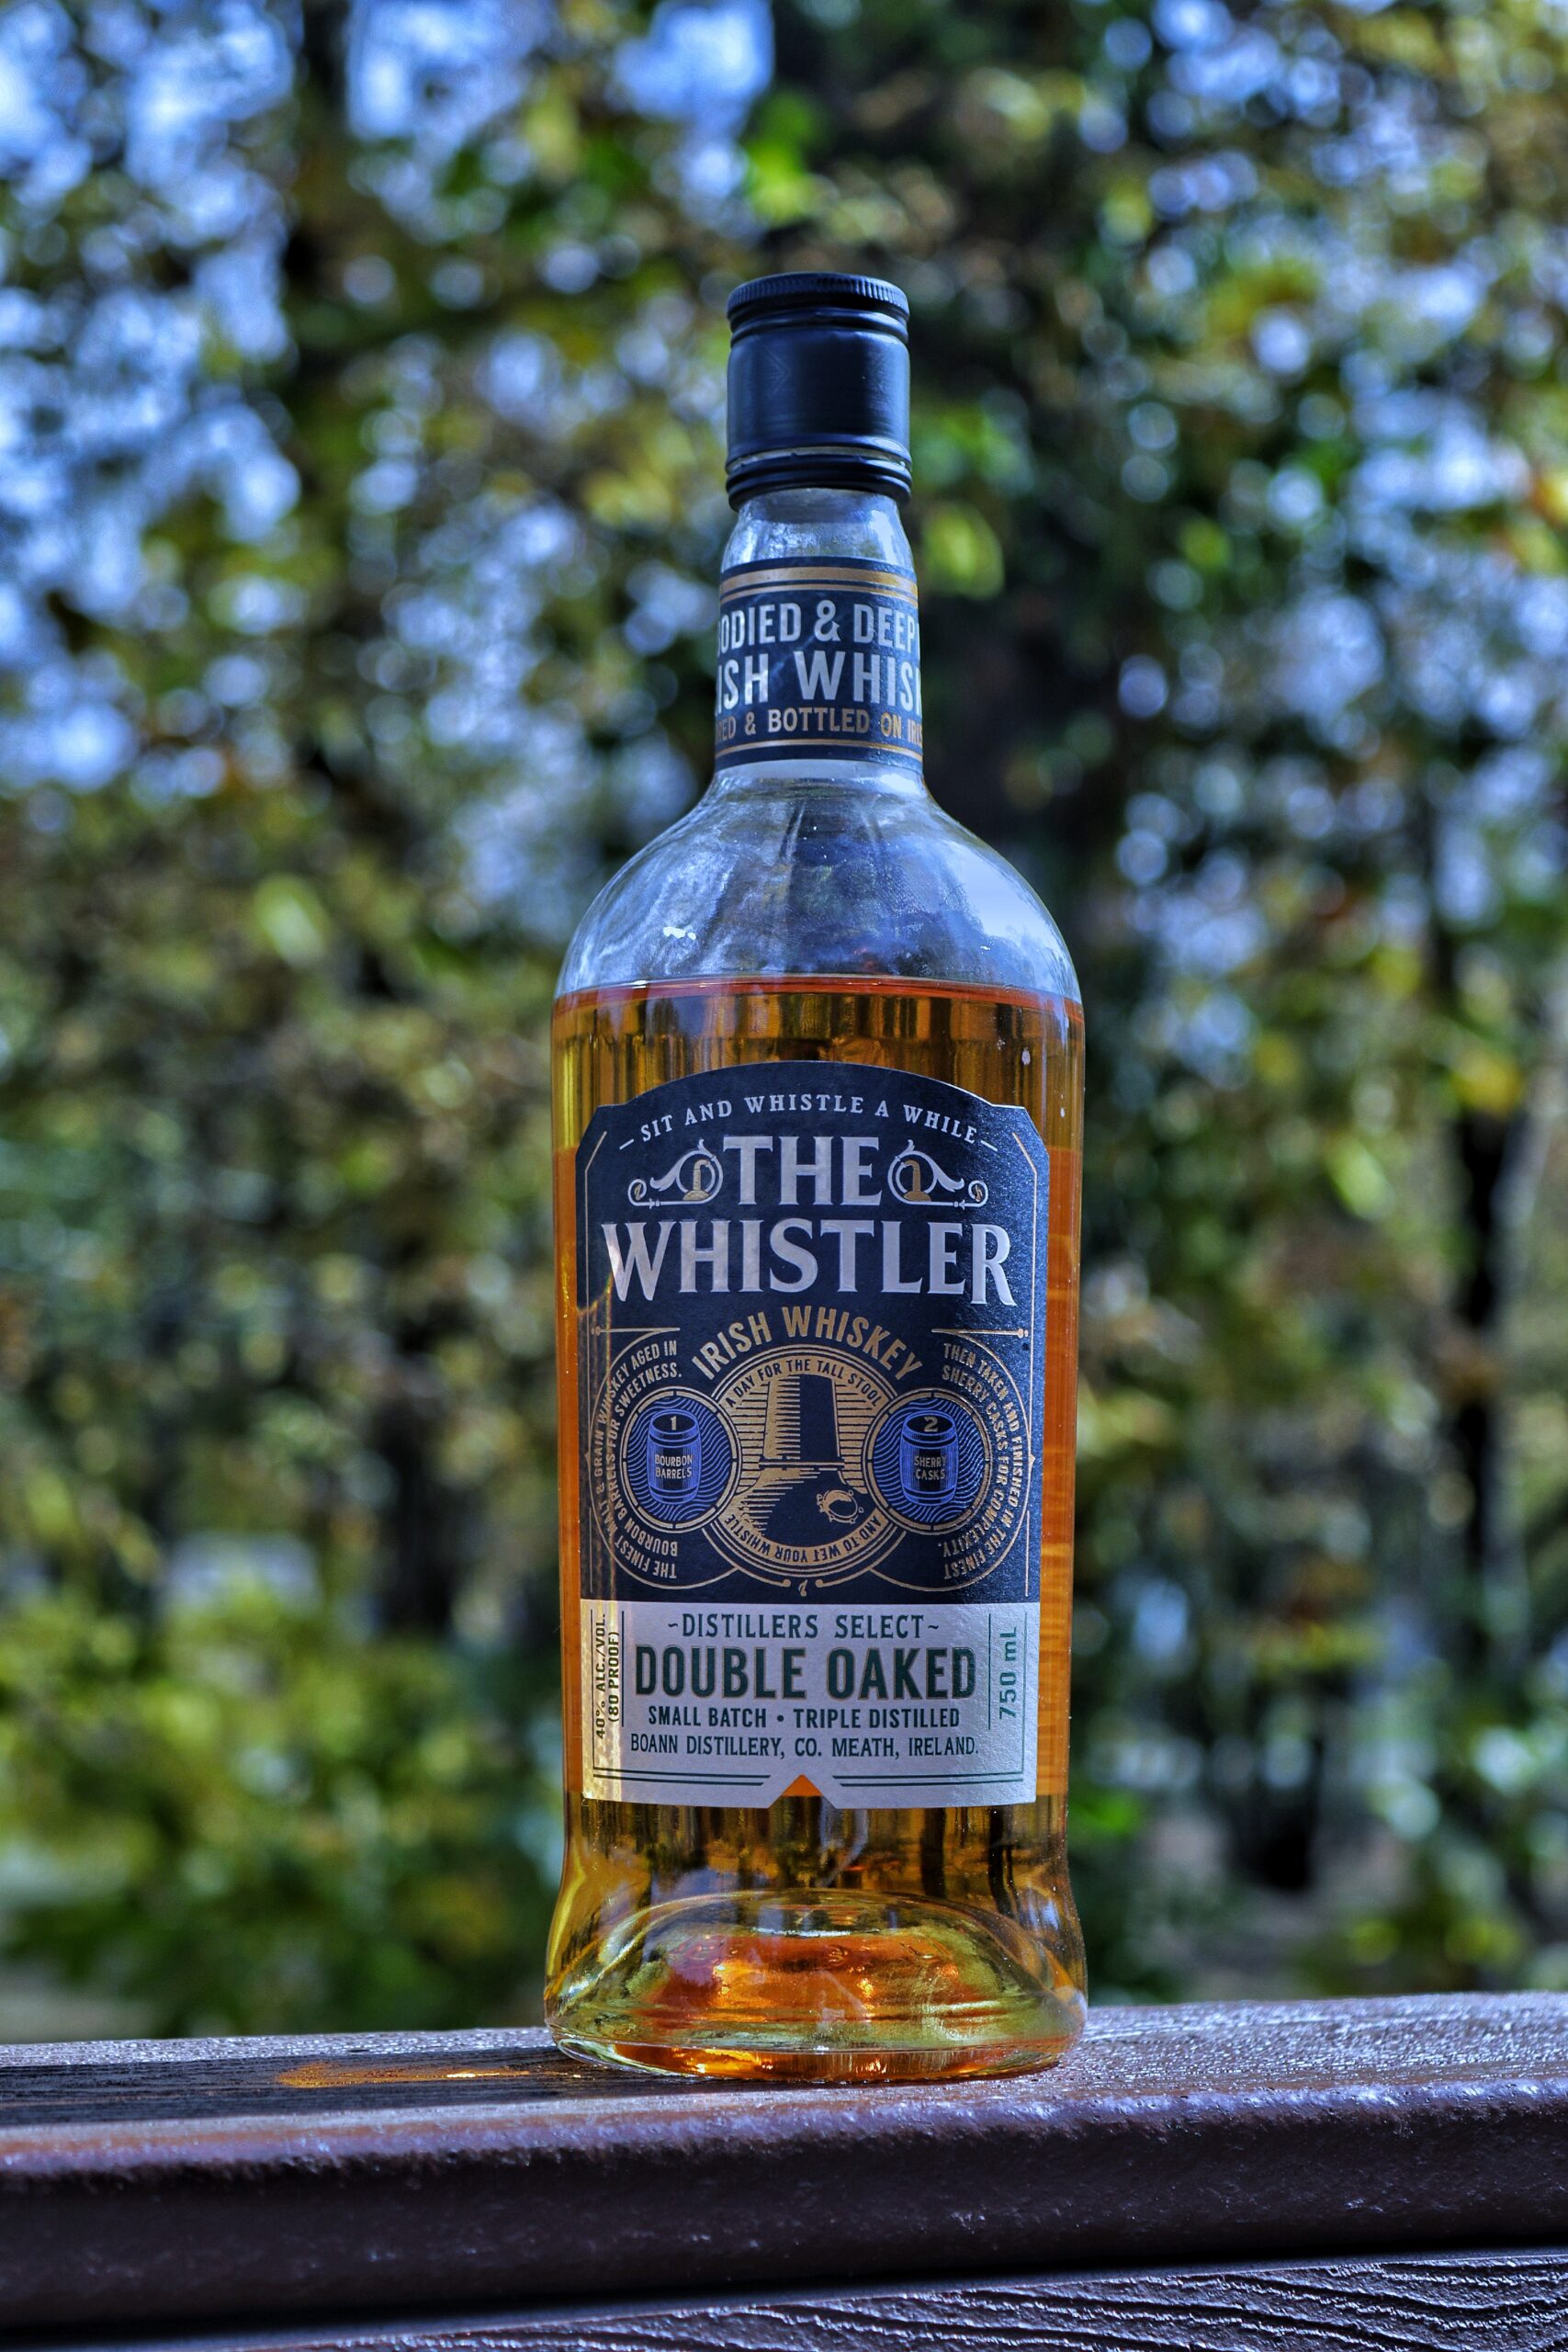 The Whistler Distillers Select: Double Oaked and Triple Distilled